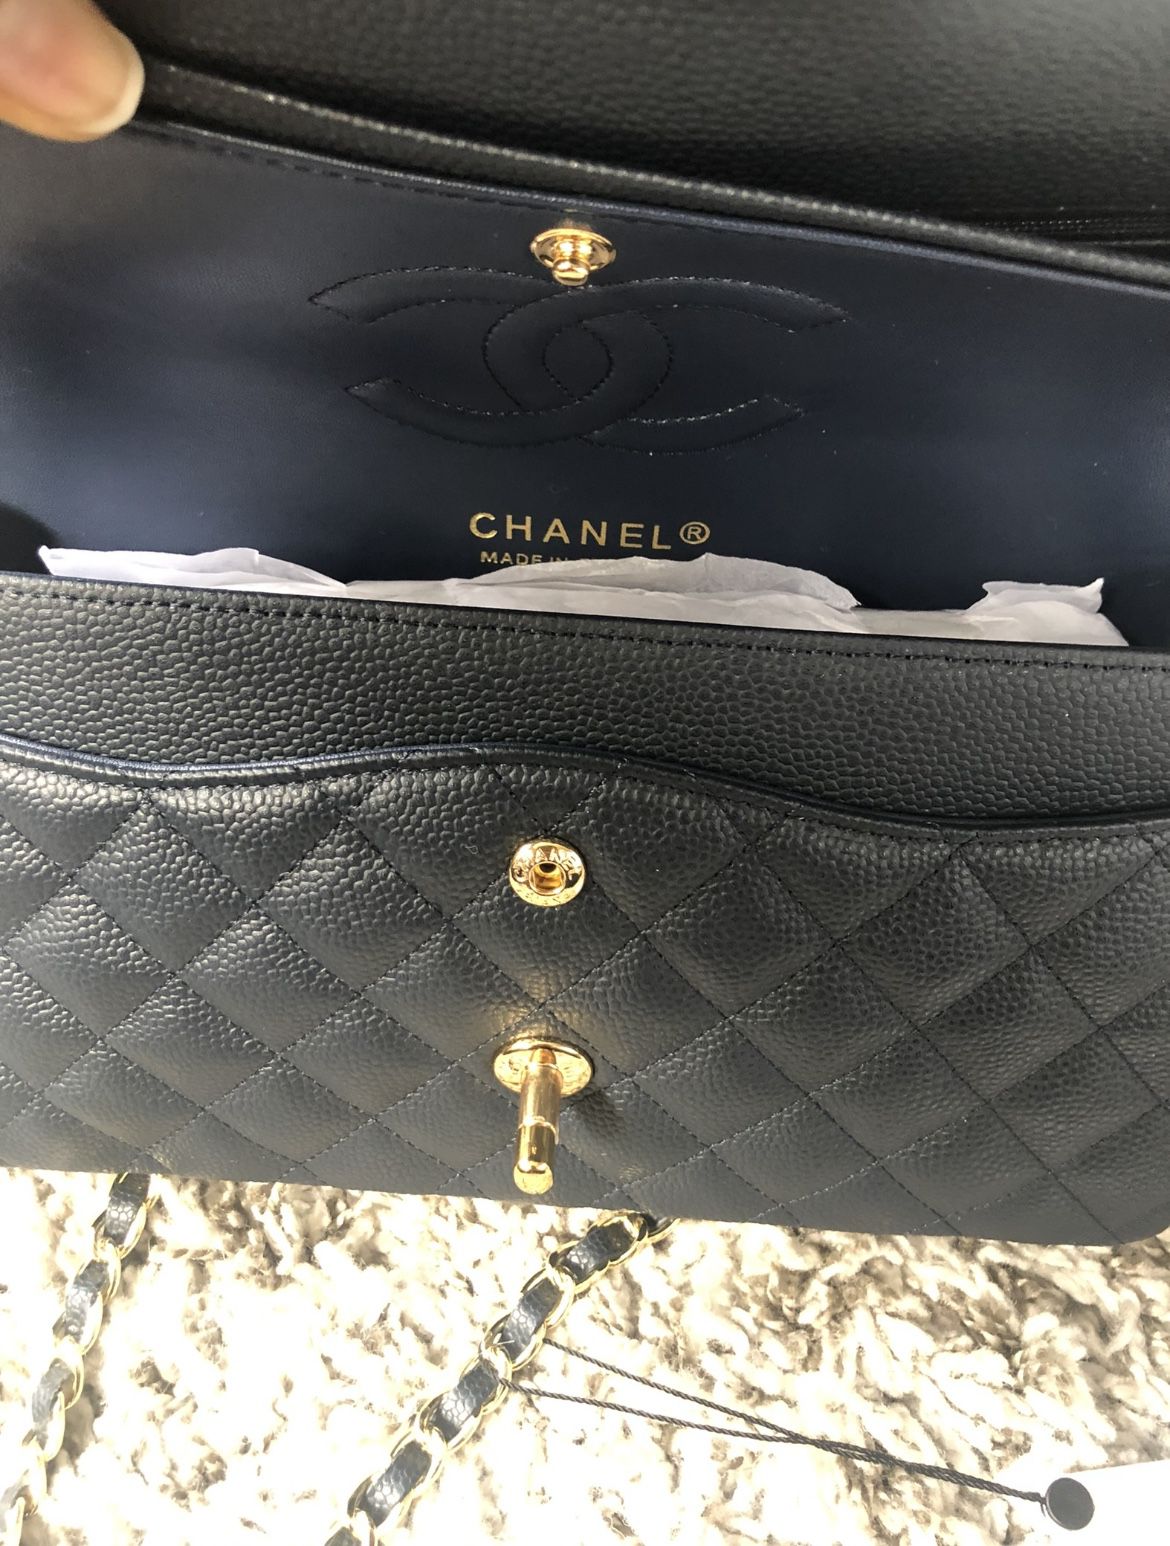 Classic Chanel Bag for Sale in Chicago, IL - OfferUp